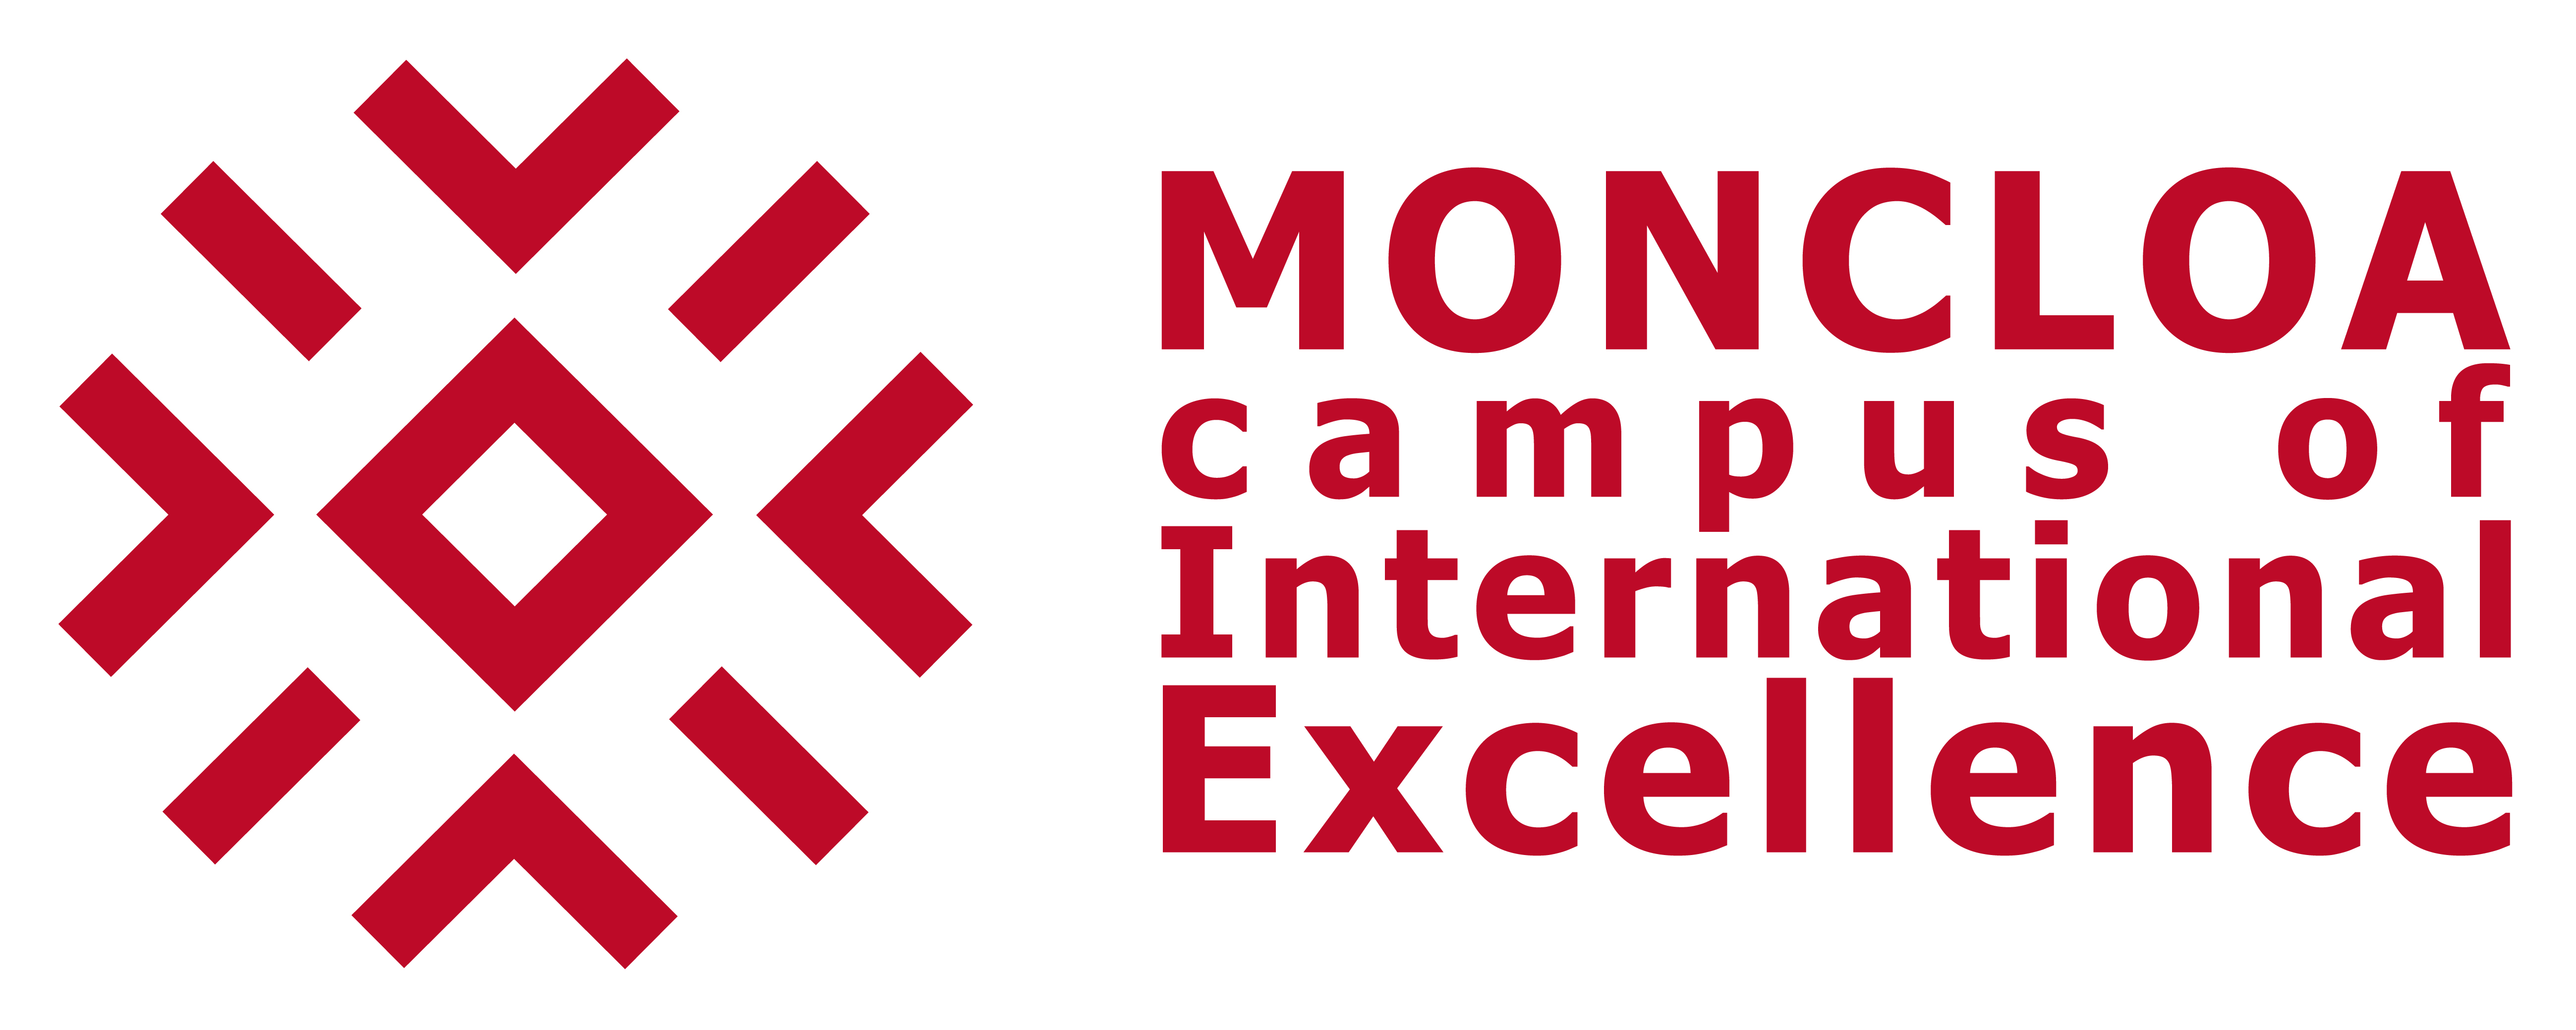 Moncloa campus of International Excellence